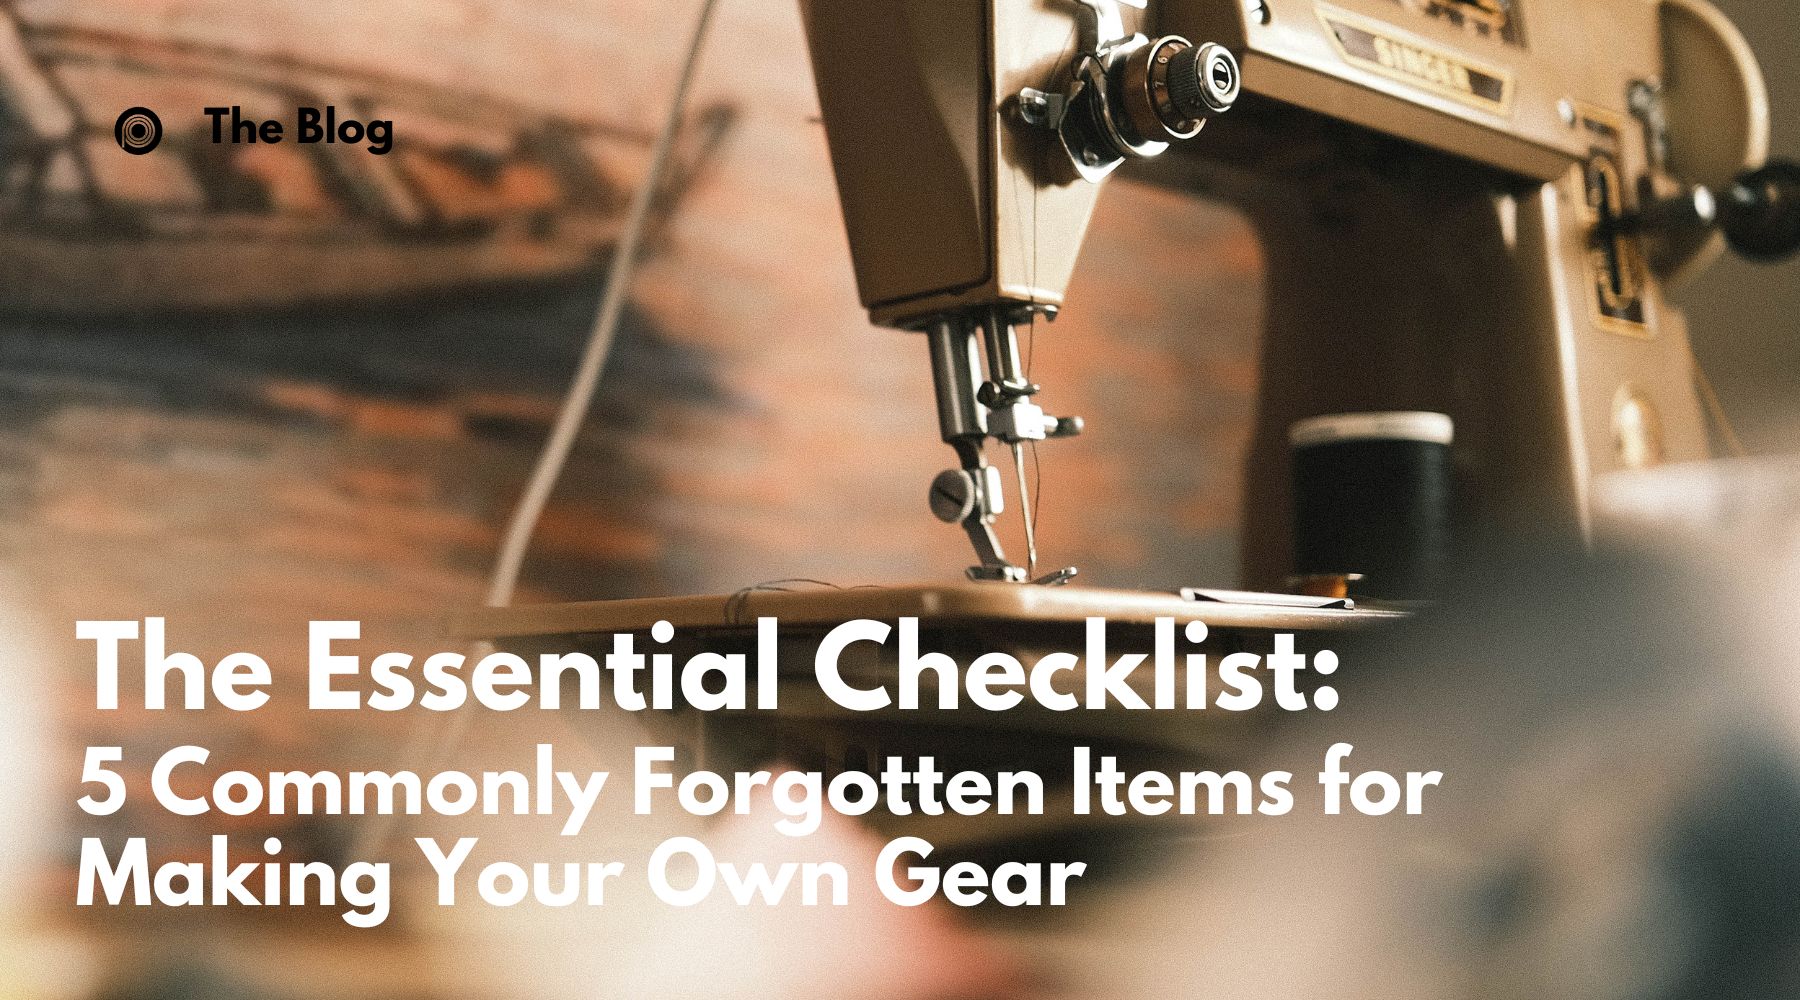 5 Commonly Forgotten Items for Making Your Own Gear